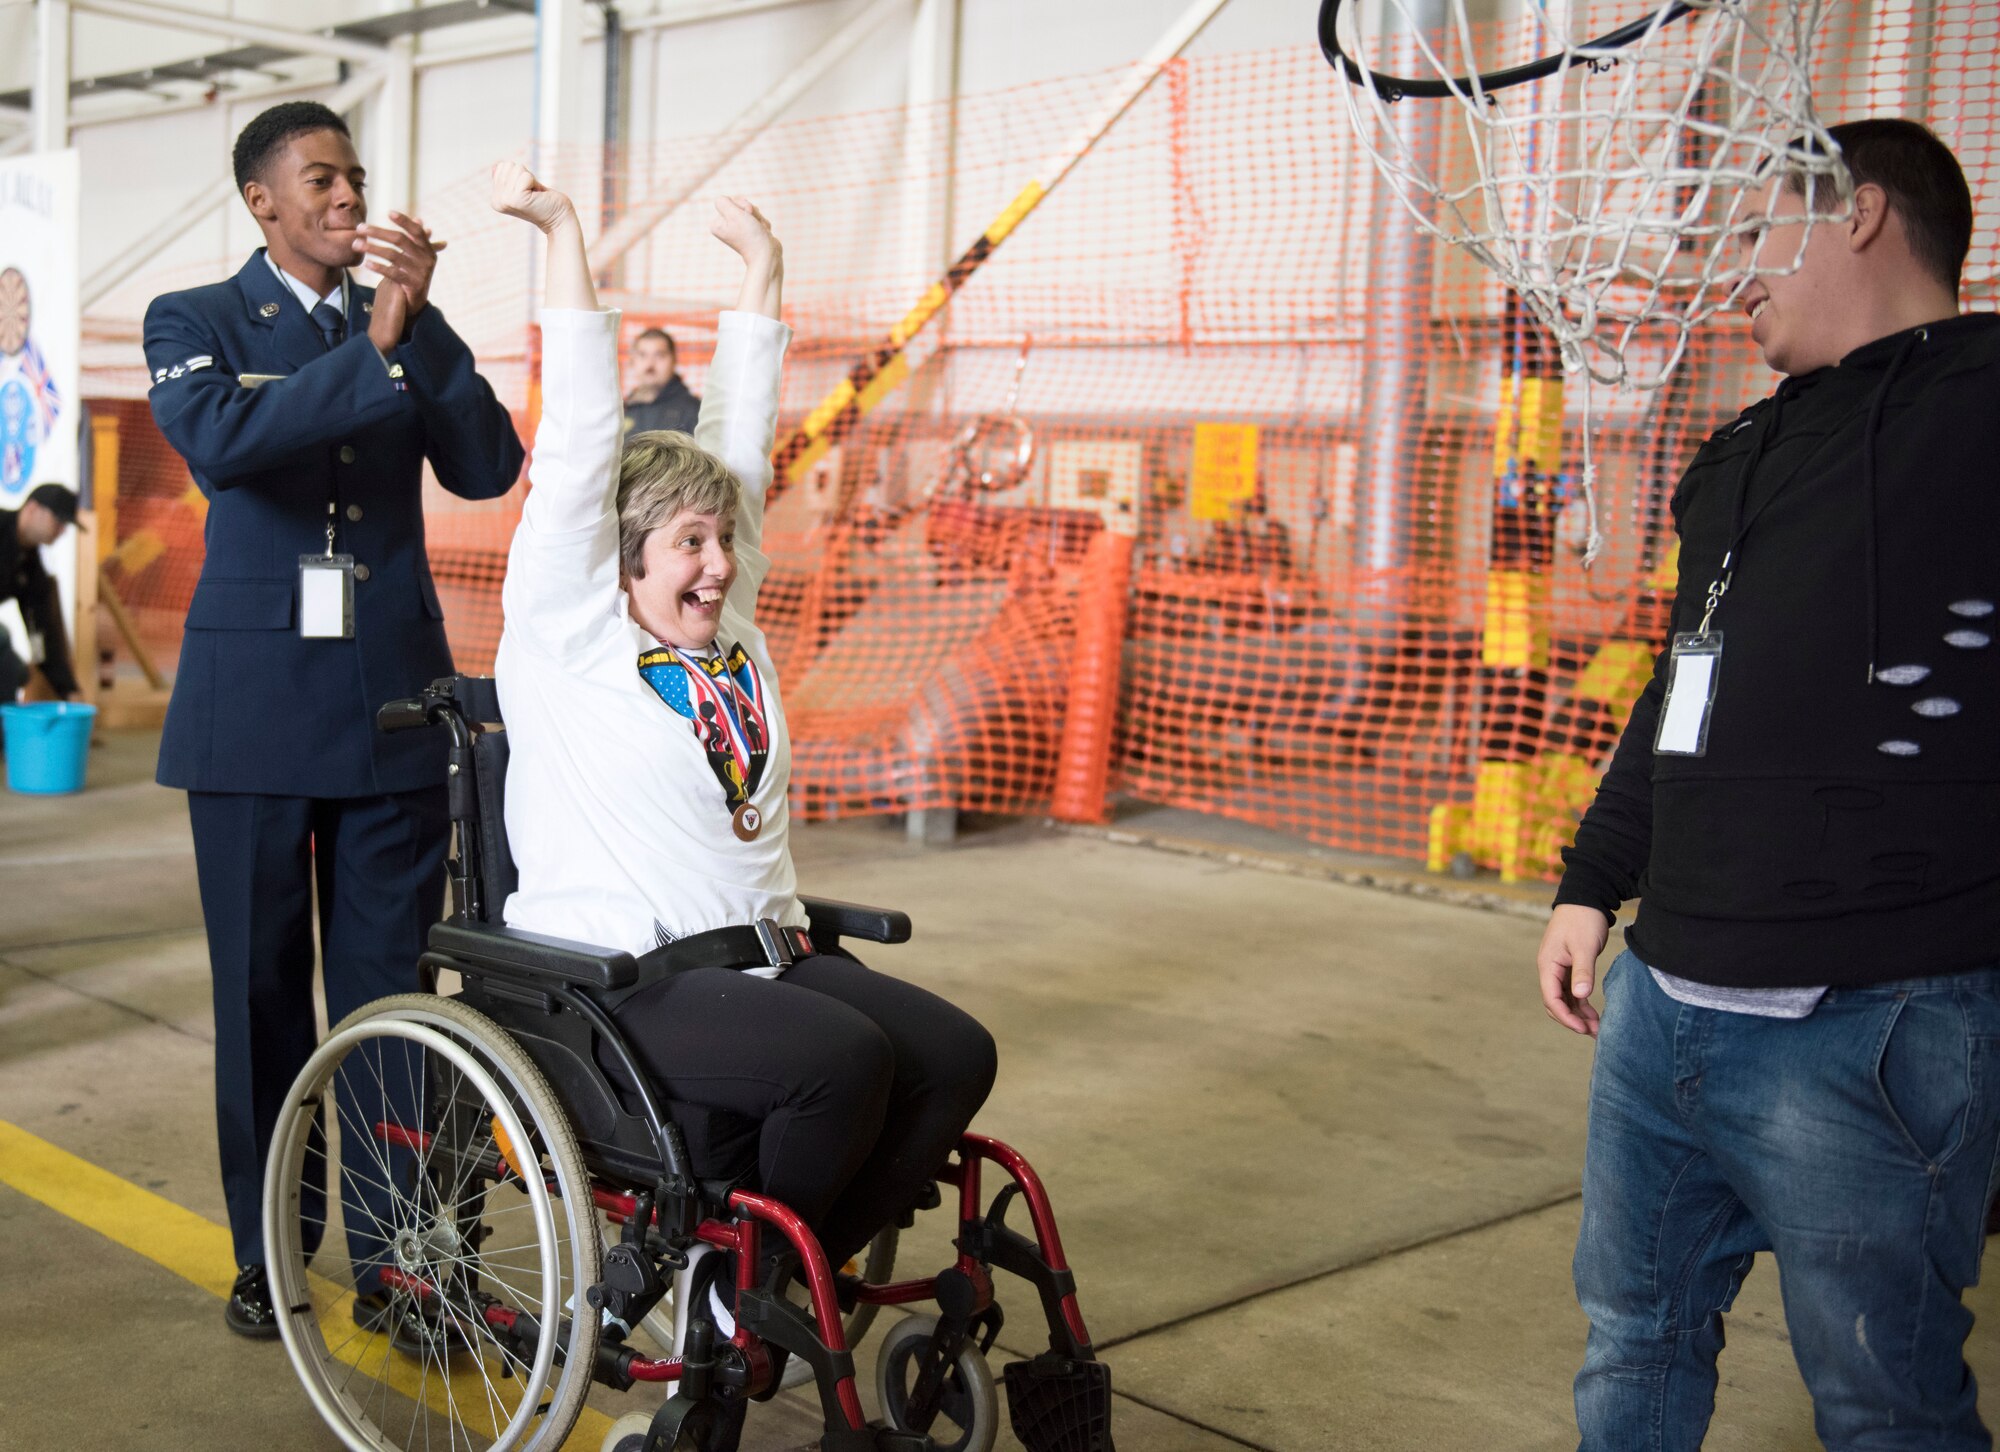 An athlete celebrates with her escort, Airman 1st Class Clarence Bennett, after getting a basketball in the hoop at the 37th Joan Mann Special Sports Day at RAF Mildenhall, England, Sept. 22, 2018.  Athletes from 28 local schools and organizations competed in 12 different sporting events, including the basketball shoot, wheel chair slalom, and American football throw. (U.S. Air Force photo by Senior Airman Lexie West)